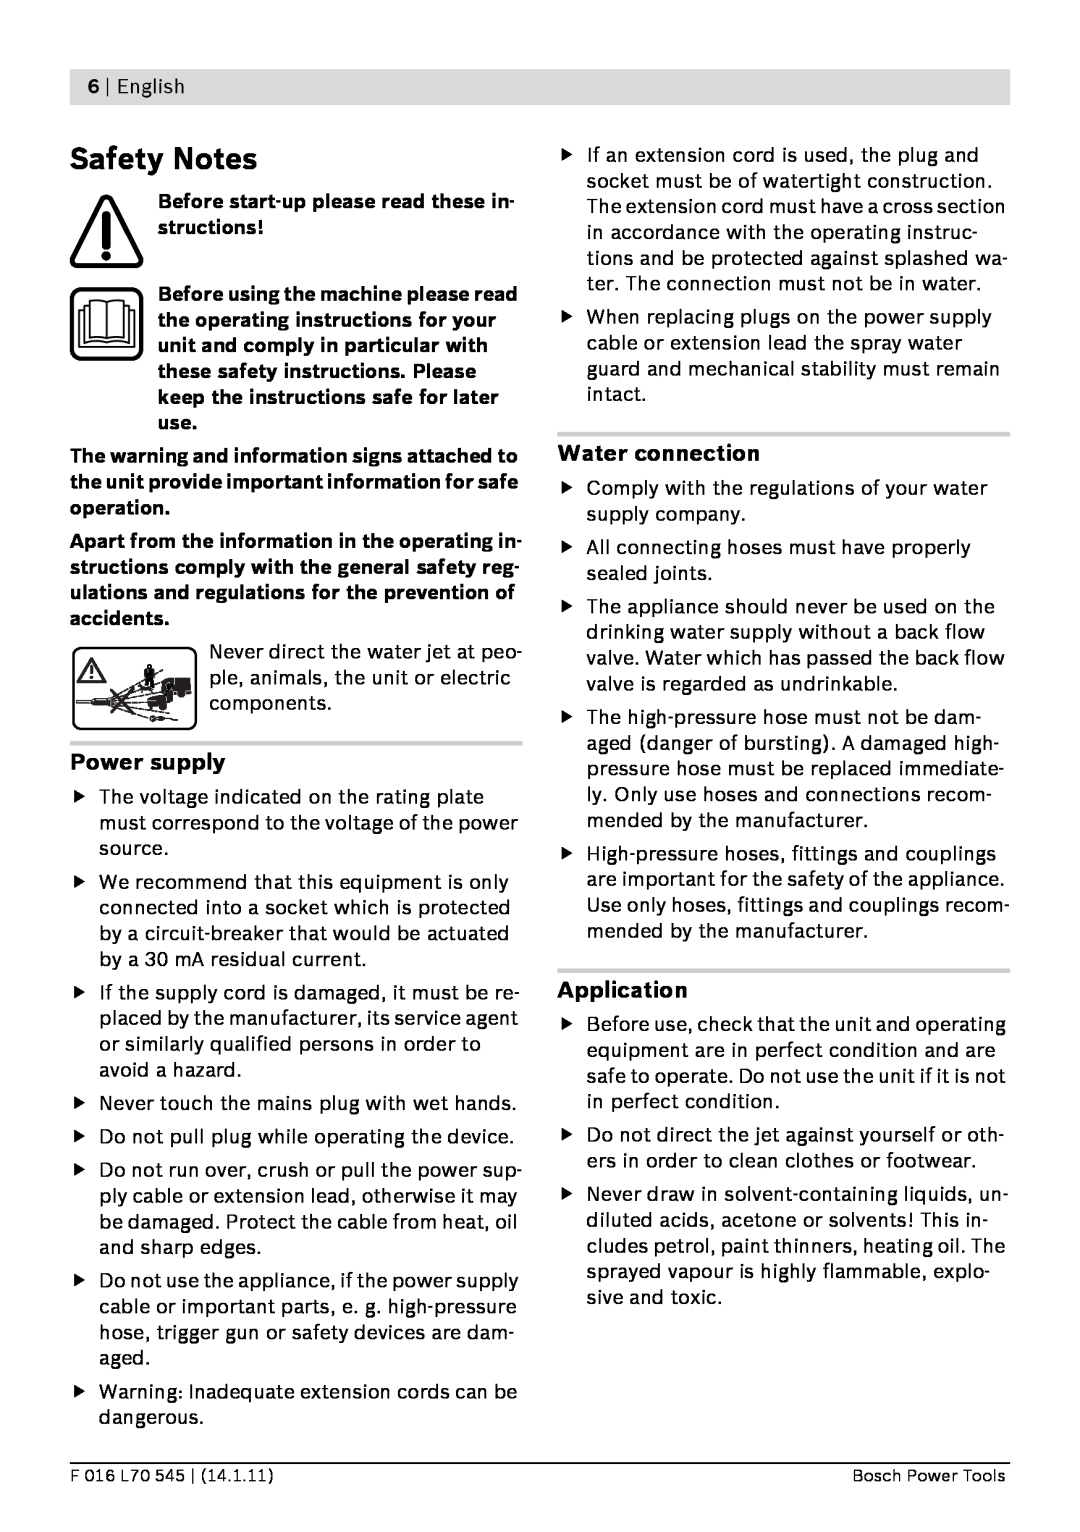 Bosch Power Tools 125 manual Safety Notes, Power supply, Water connection, Application 